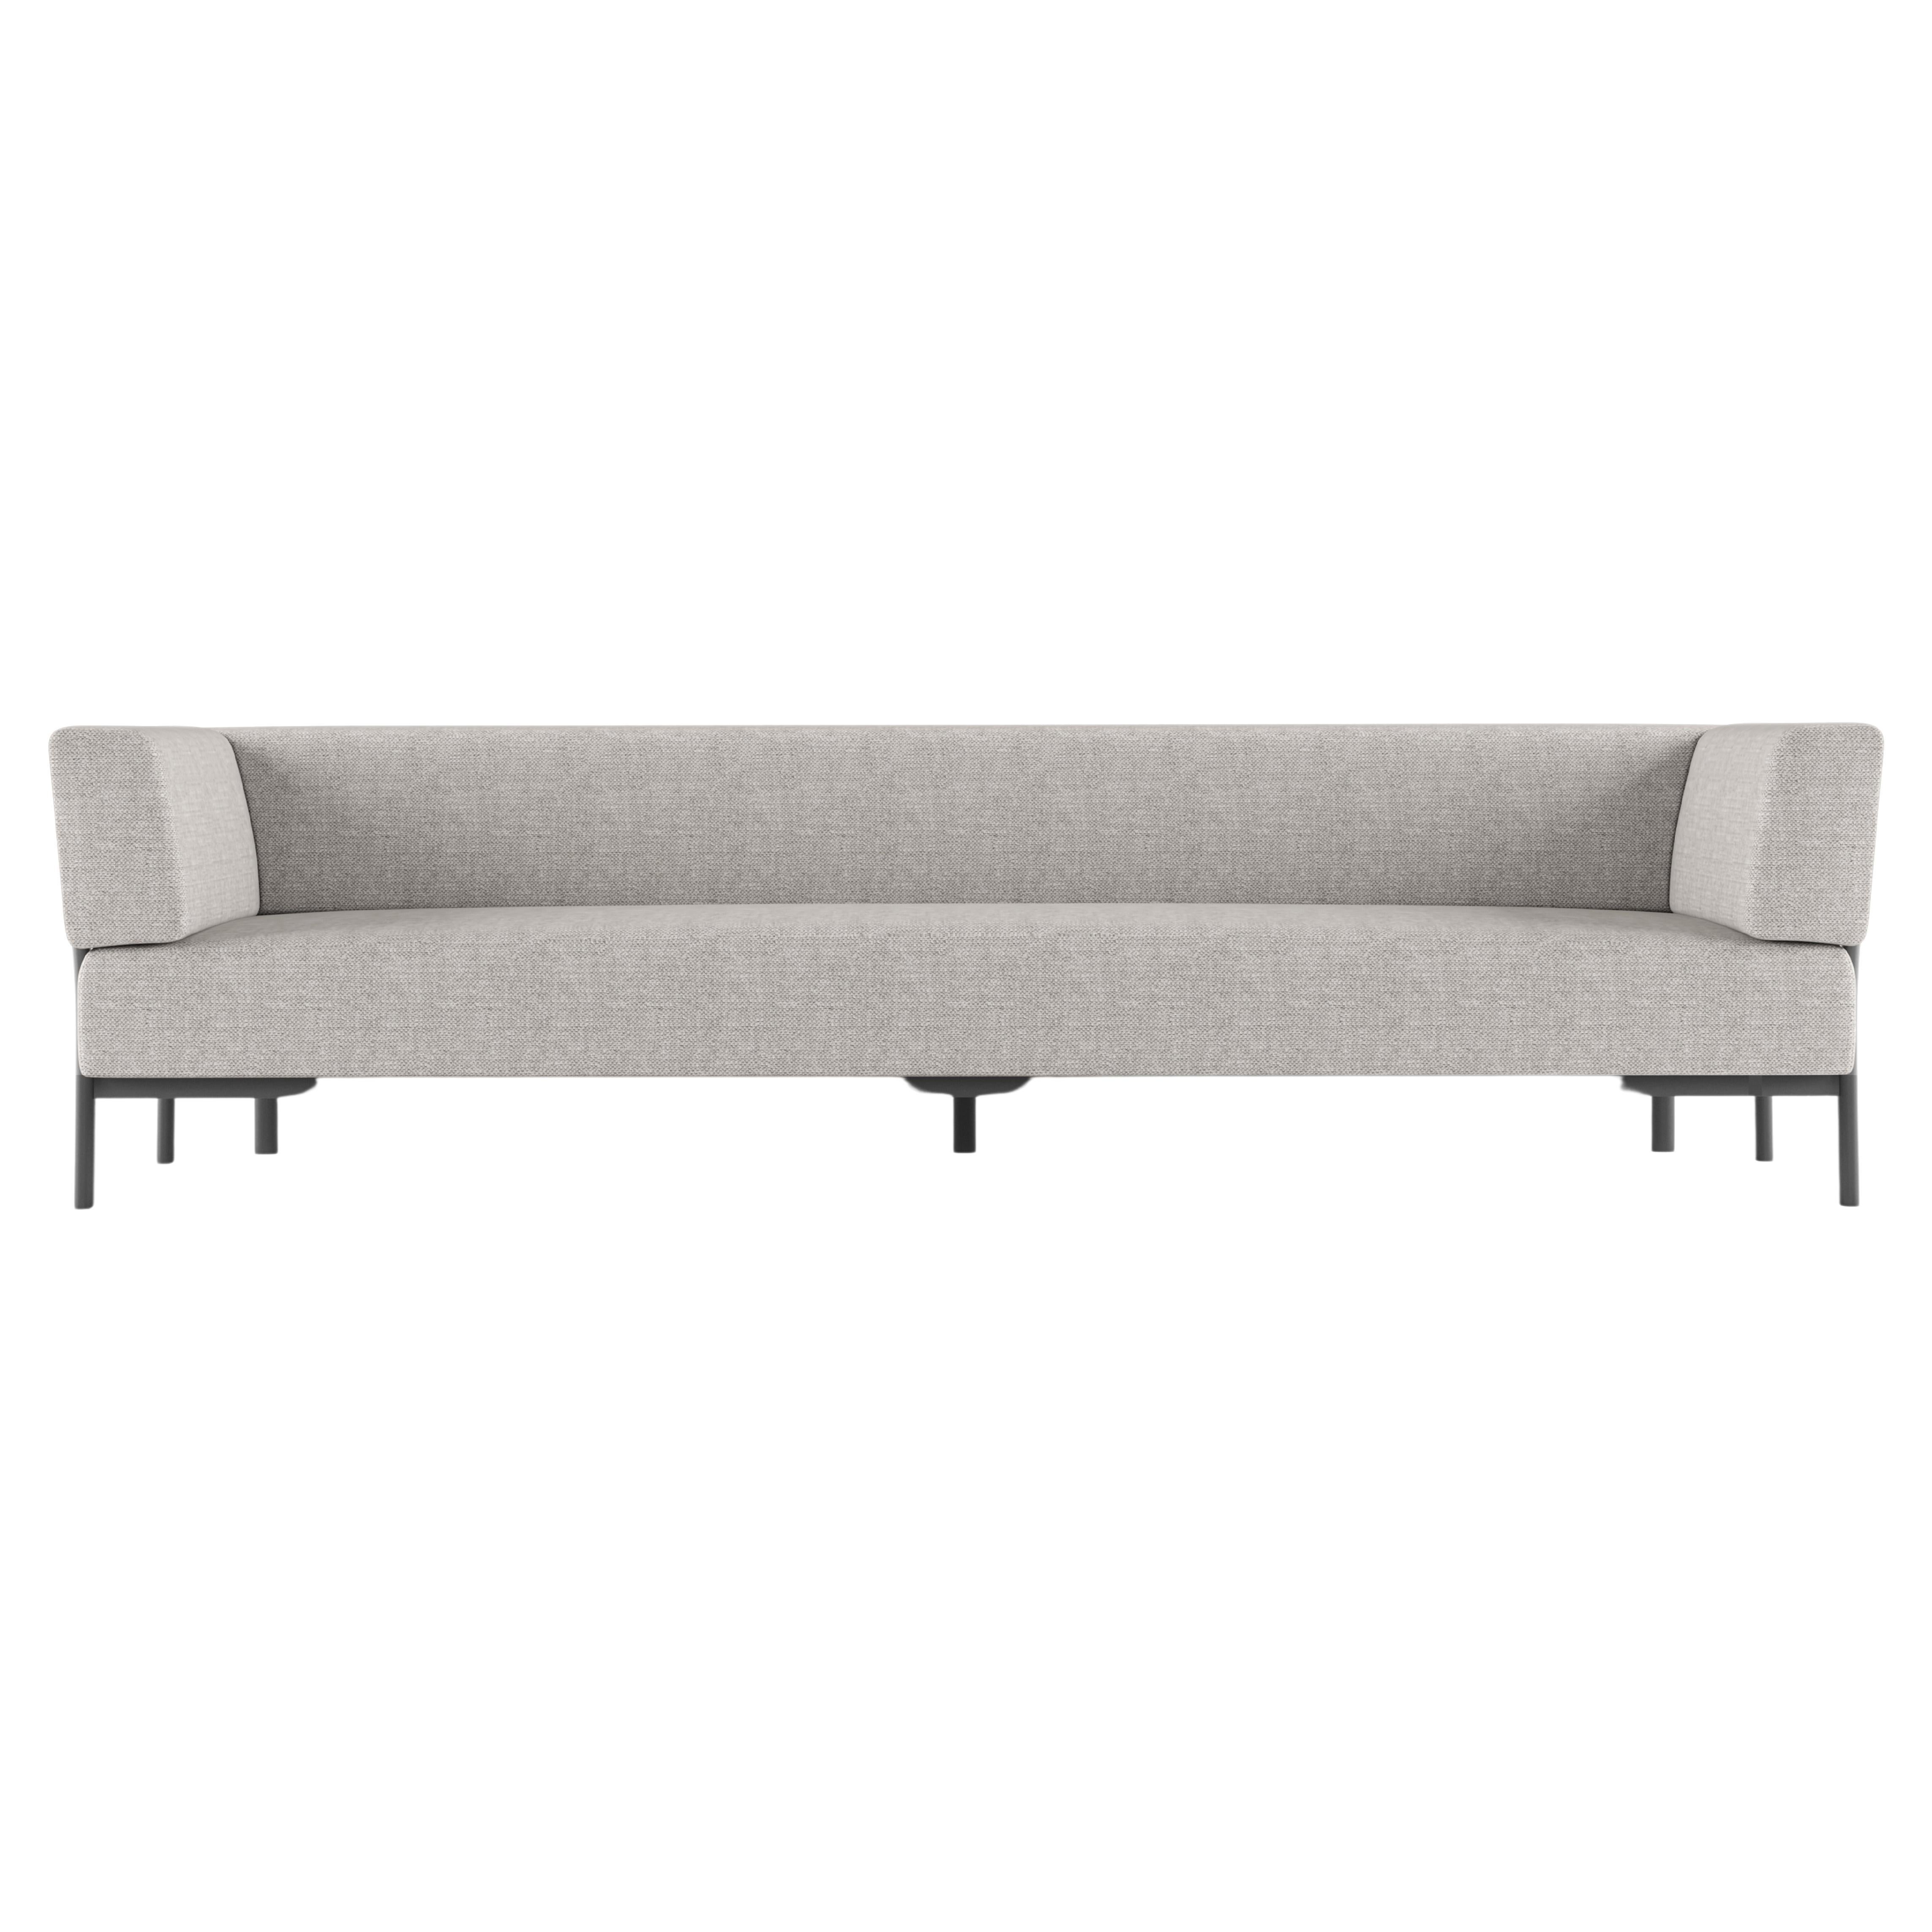 Alias T03_O Ten 3 Seater Outdoor Sofa in Grey and Black Lacquered Aluminum Frame For Sale